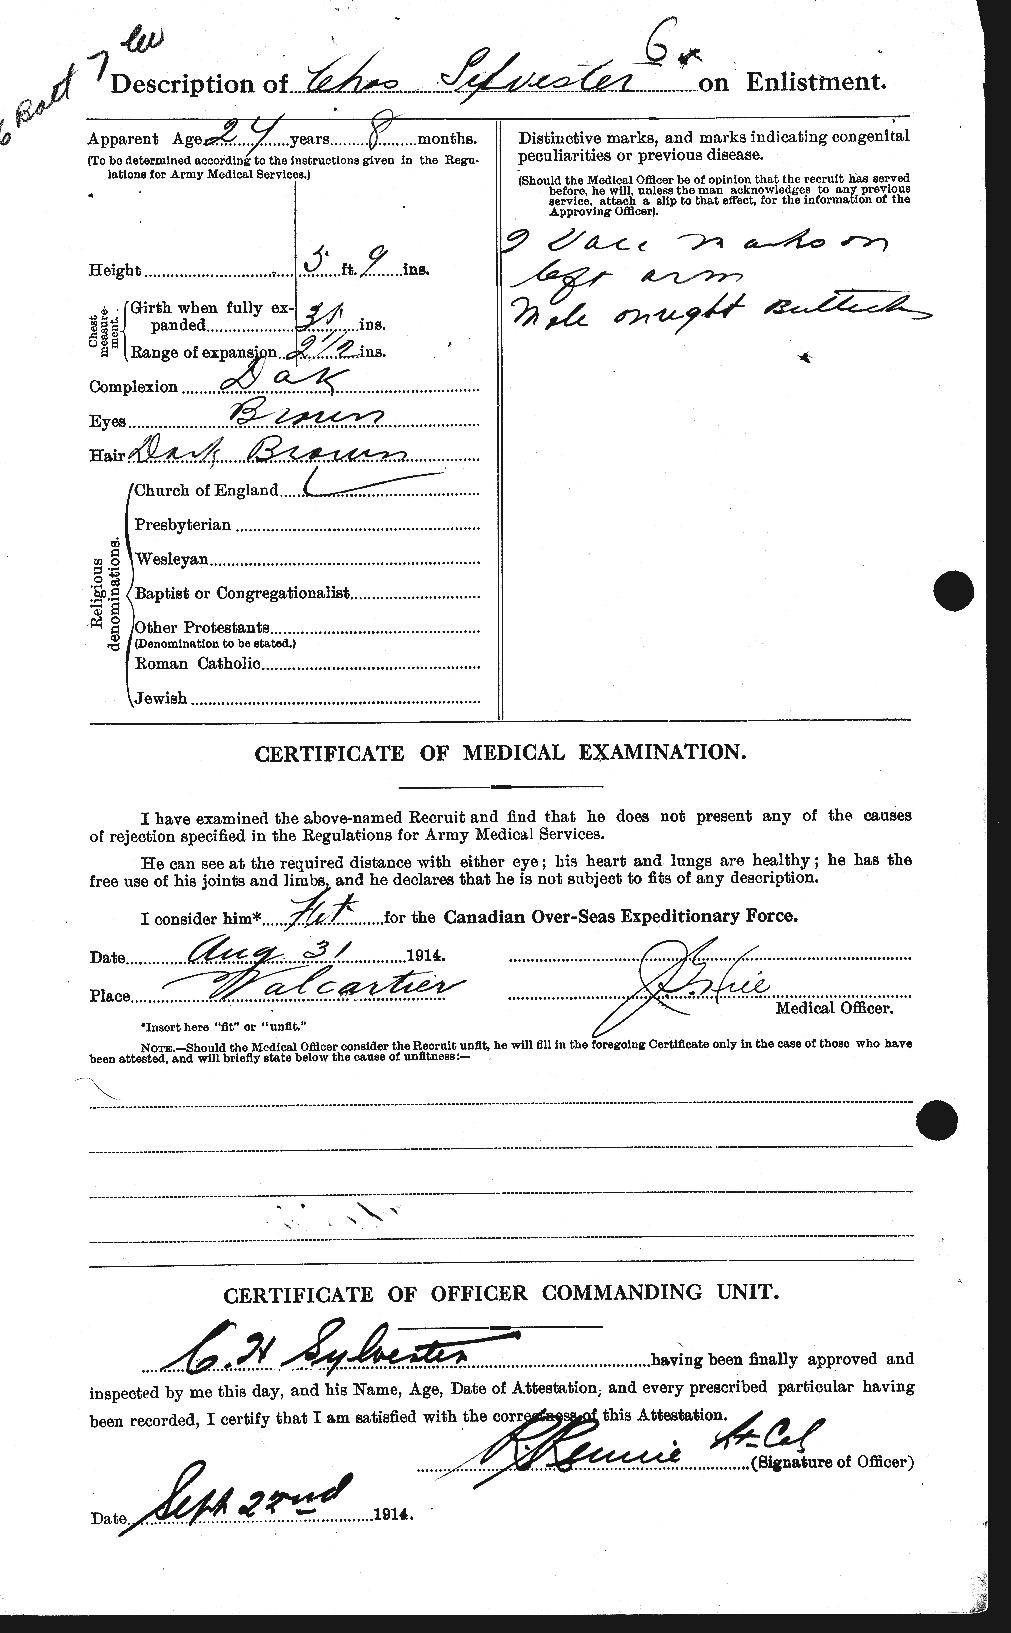 Personnel Records of the First World War - CEF 095809b